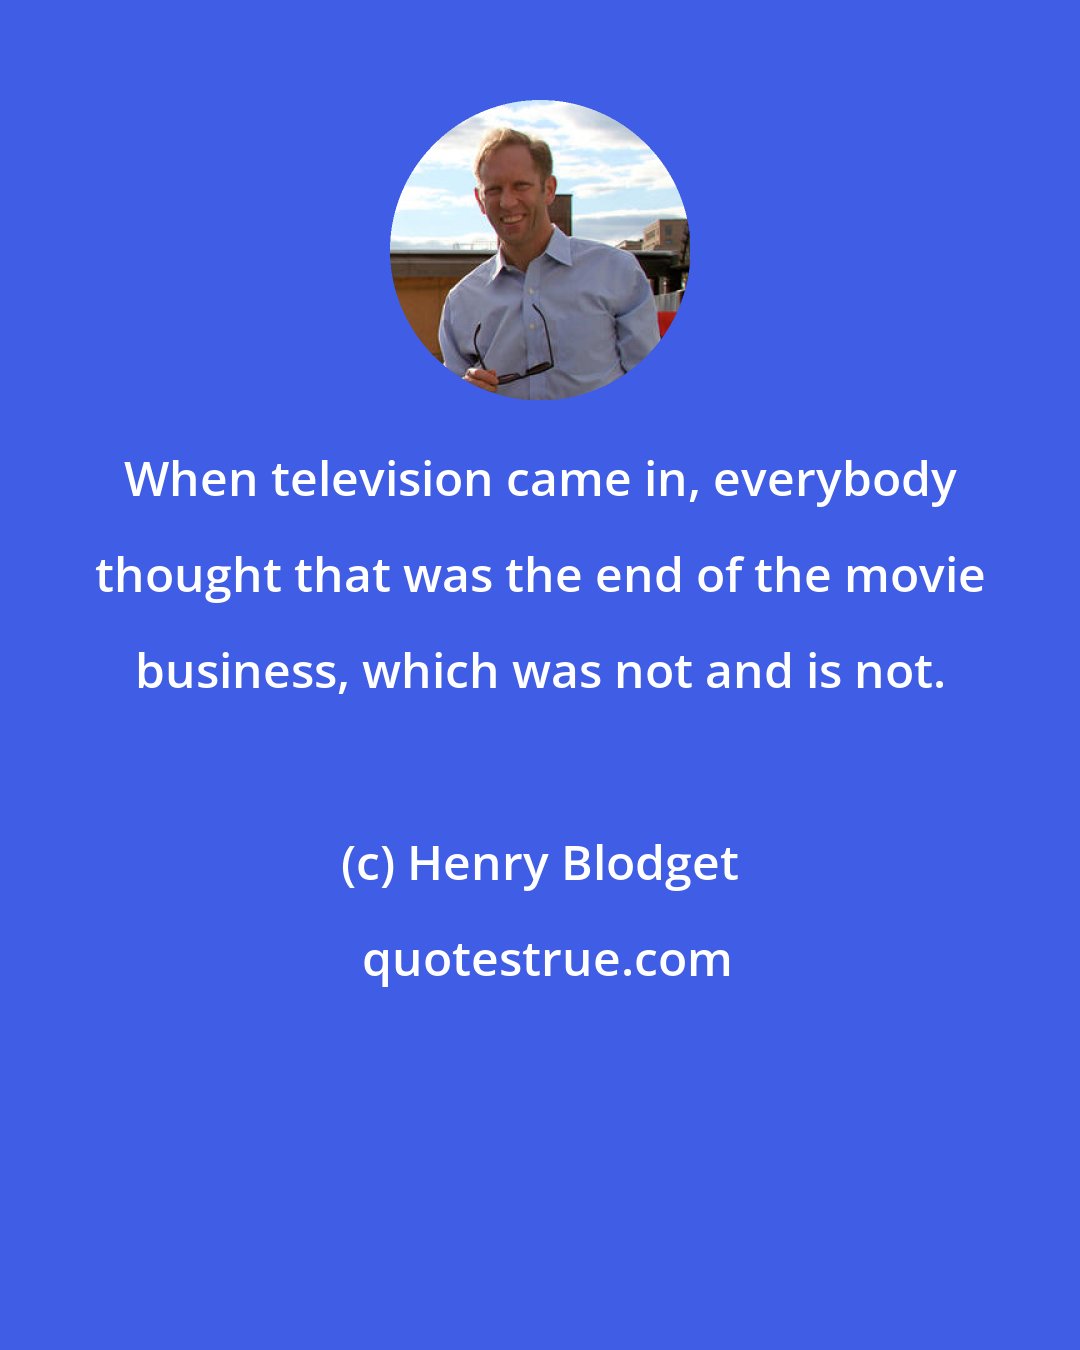 Henry Blodget: When television came in, everybody thought that was the end of the movie business, which was not and is not.